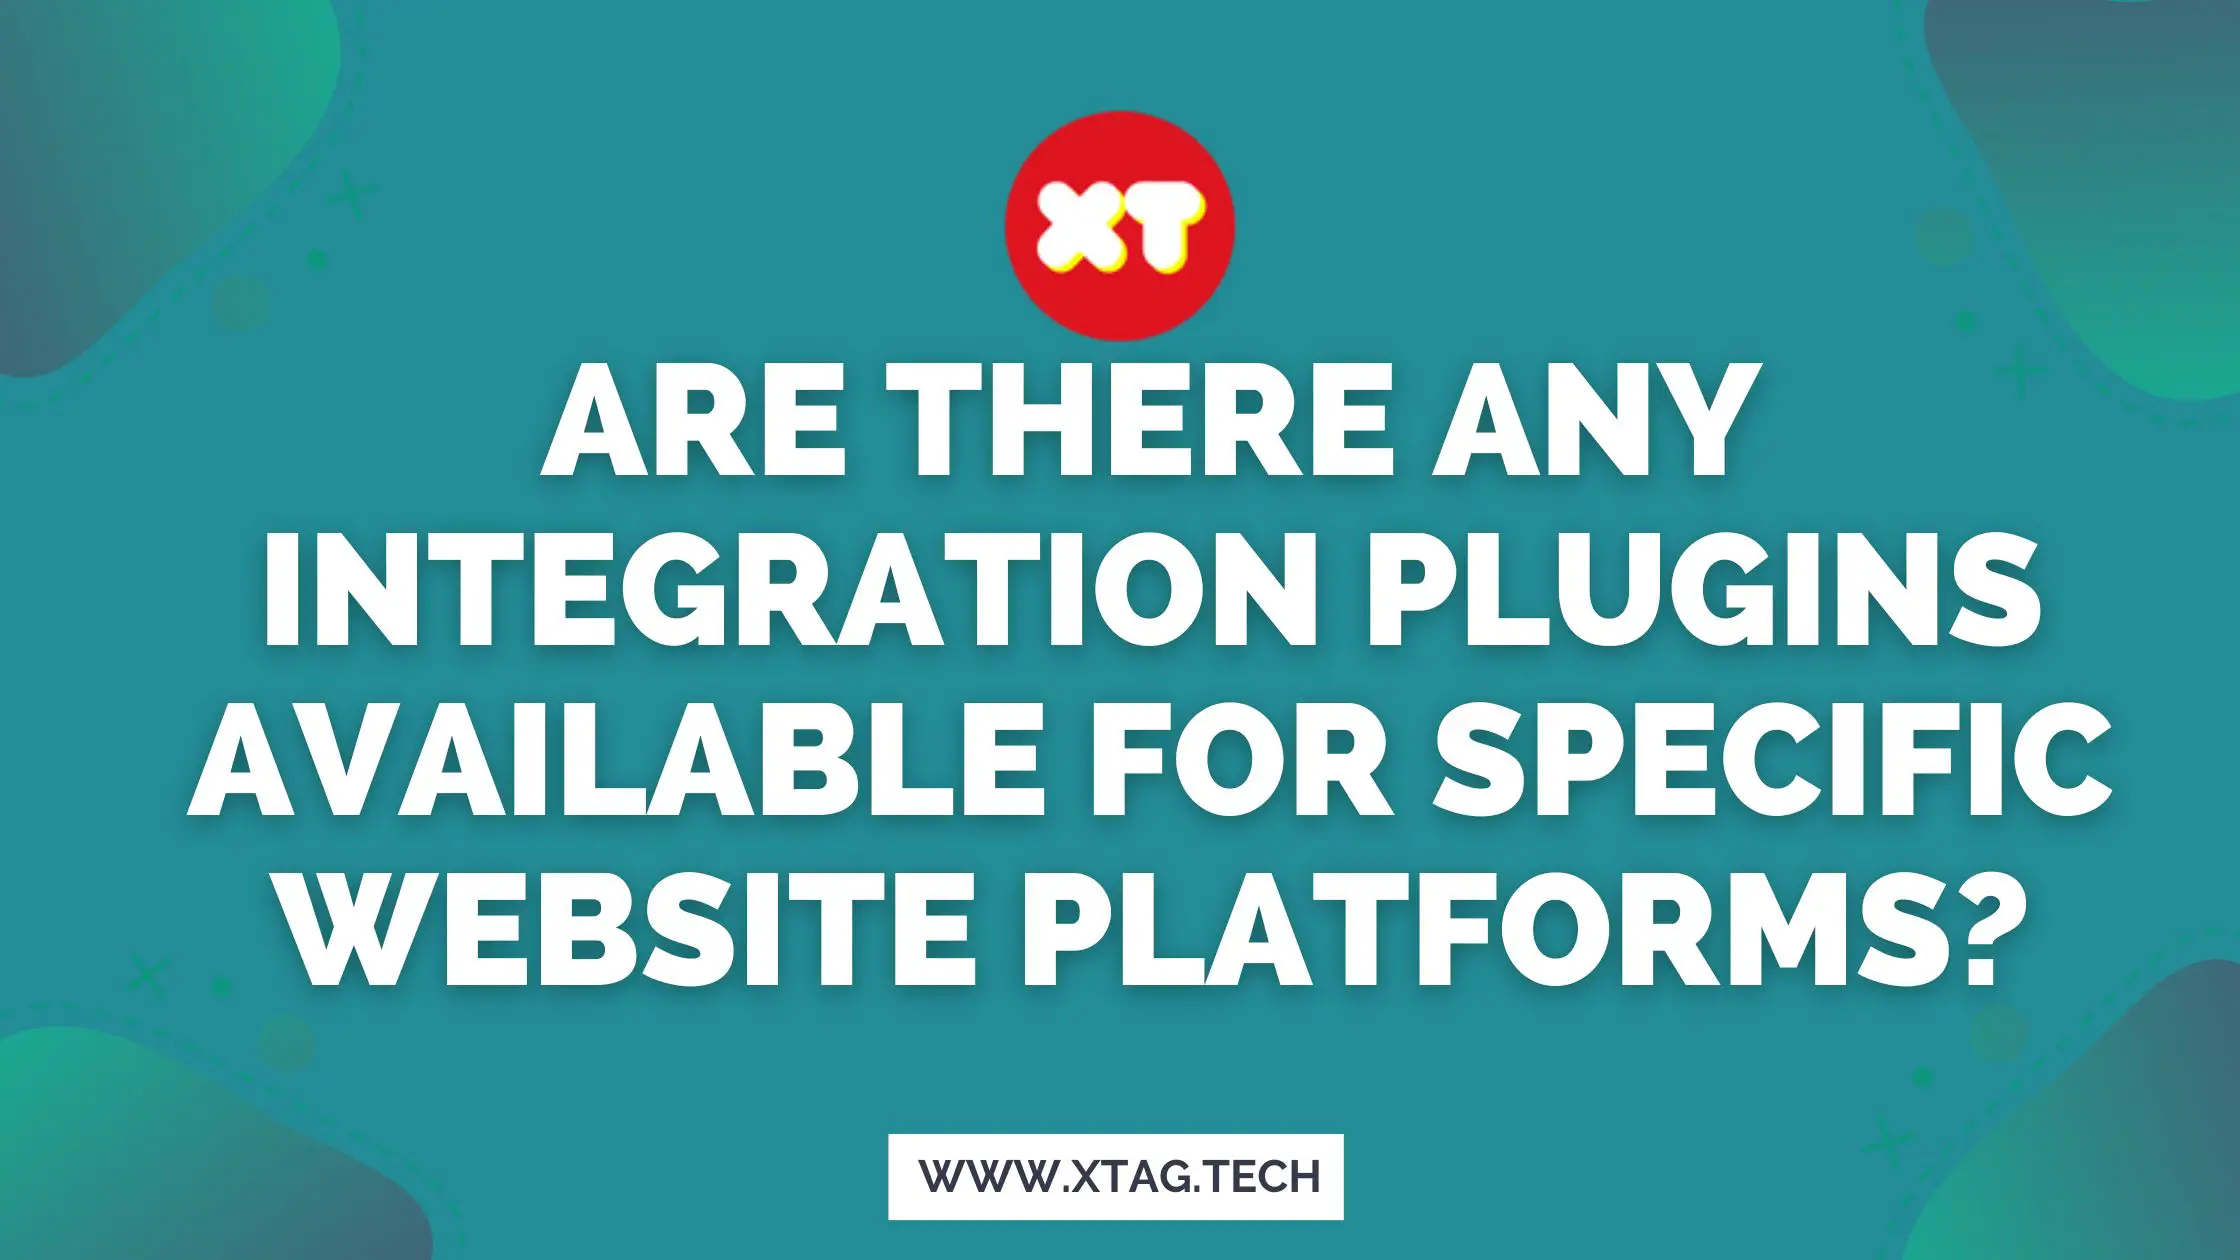 Are There Any Integration Plugins Available For Specific Website Platforms?